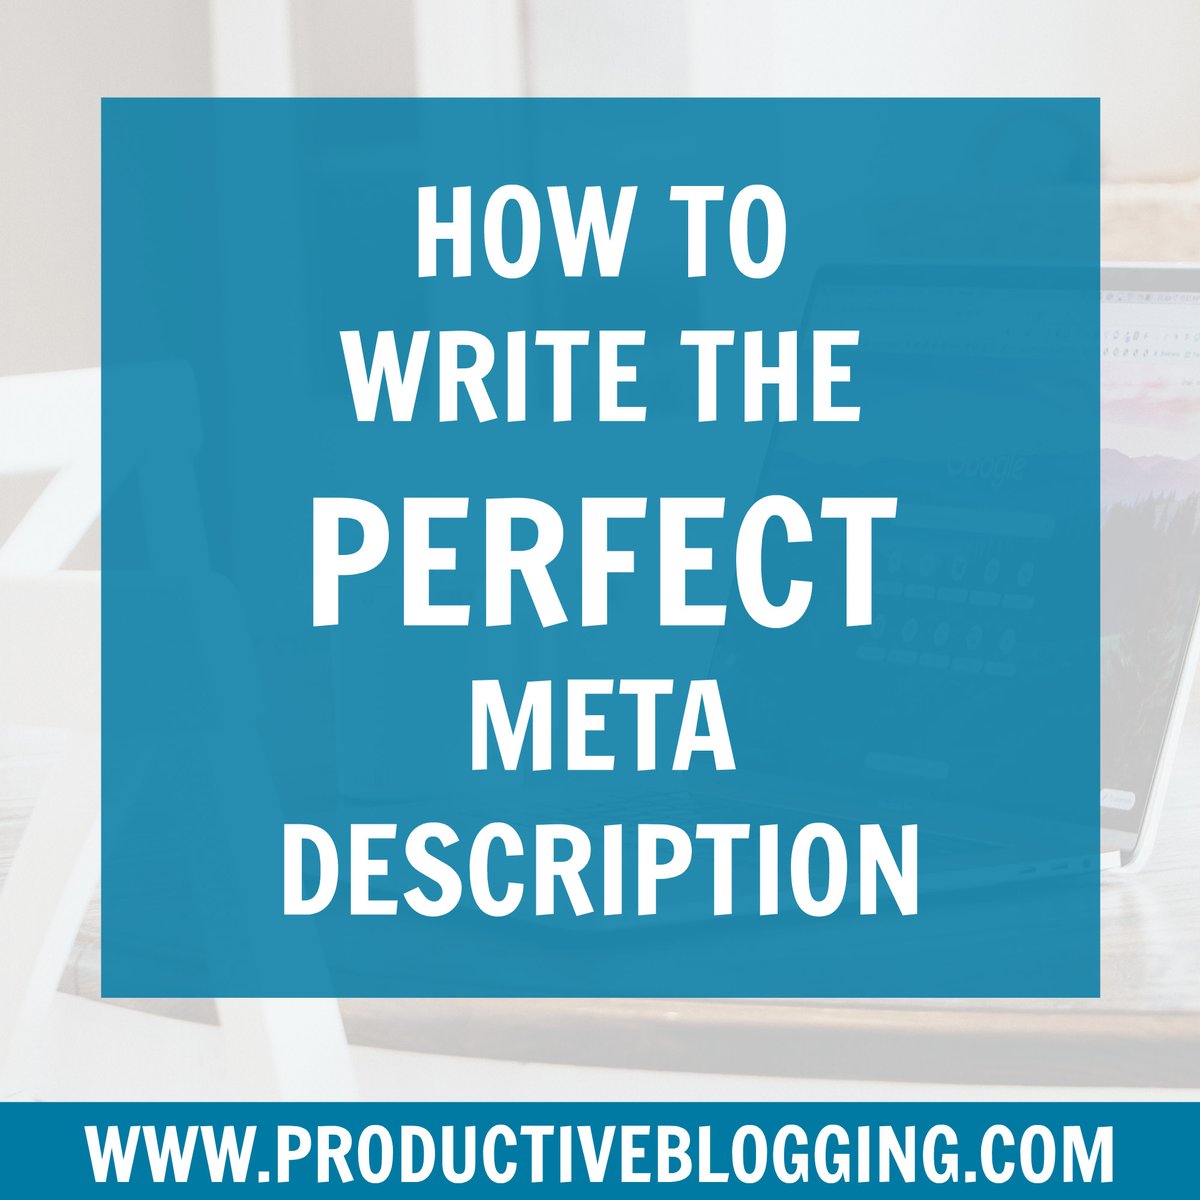 A good meta description can have a dramatic effect on your SEO and consequently your blog traffic. But what exactly is a meta description, and how does it affect your SEO? Find out how to write the perfect meta description >>> bit.ly/3j9rMIc

#seo #seotips #bloggingtips